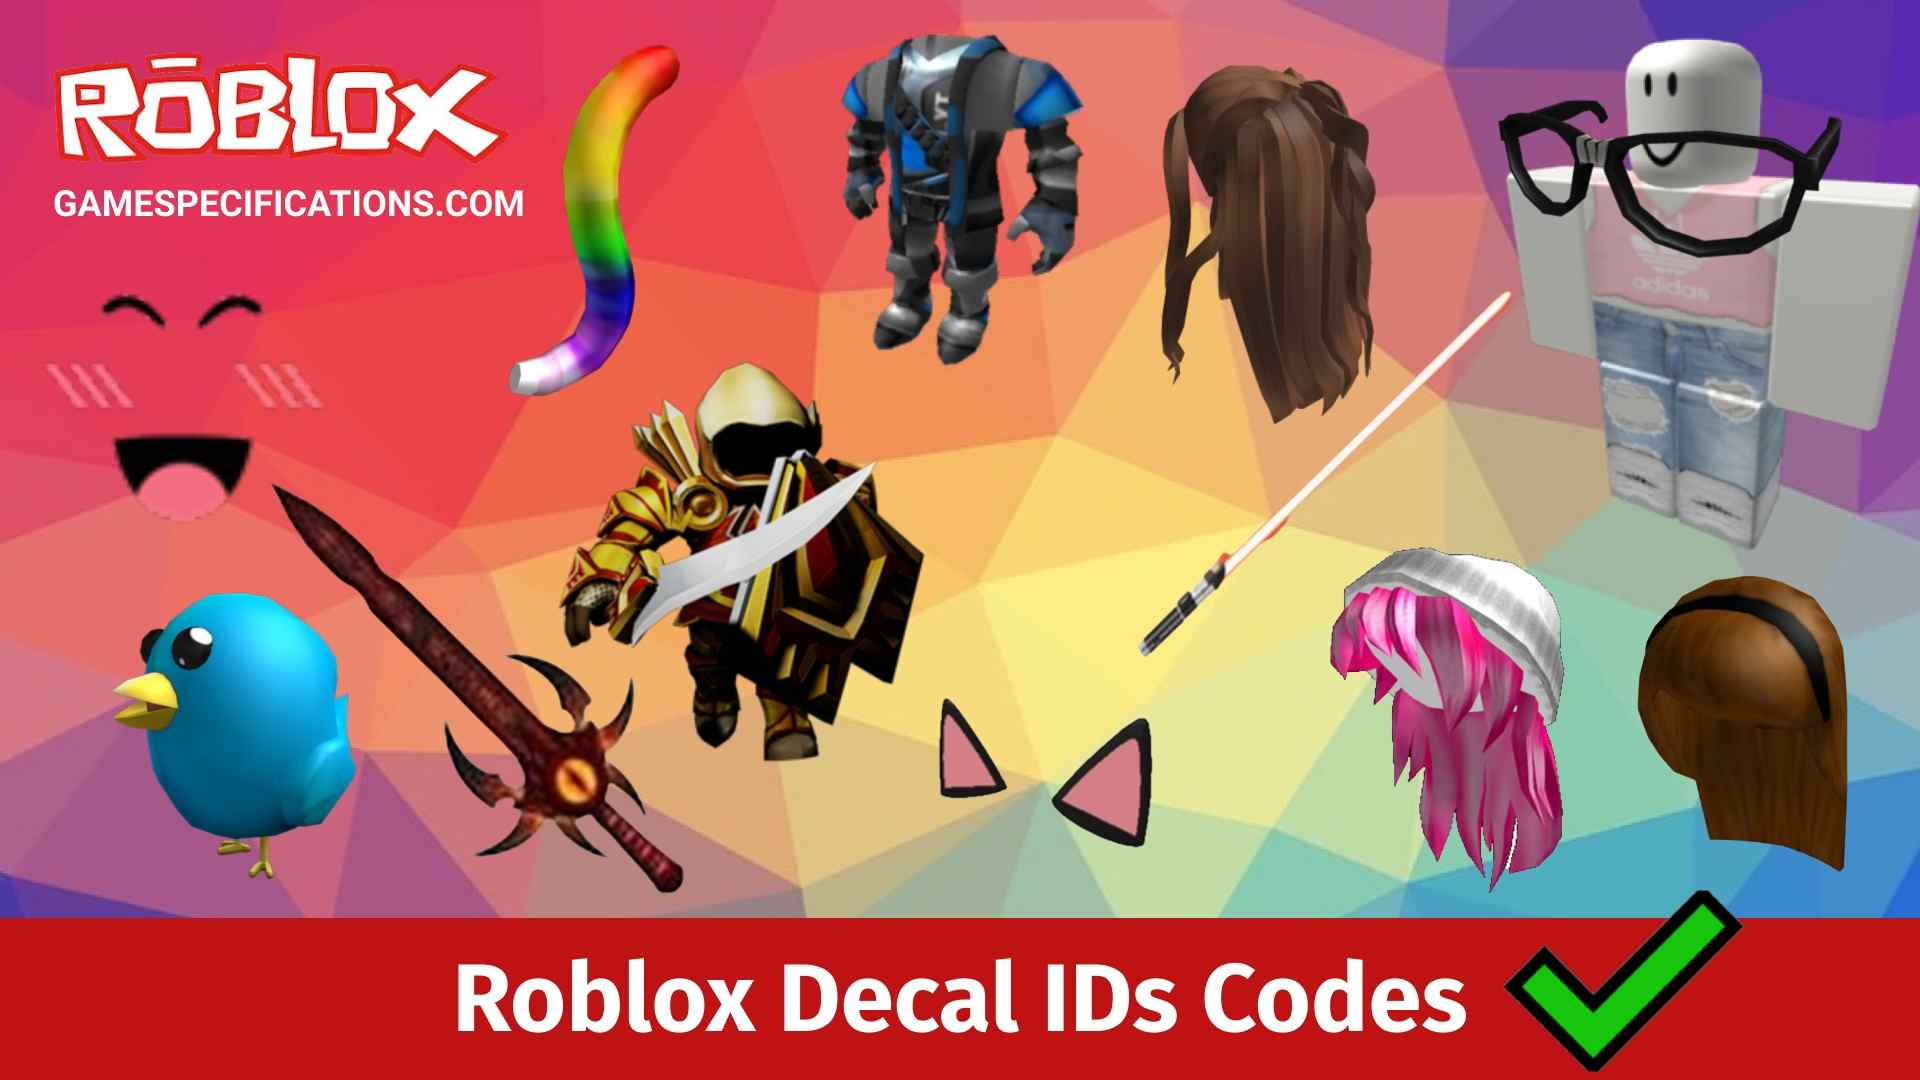 70 Popular Roblox Decal IDs Codes | Image IDs [2022] - Game Specifications